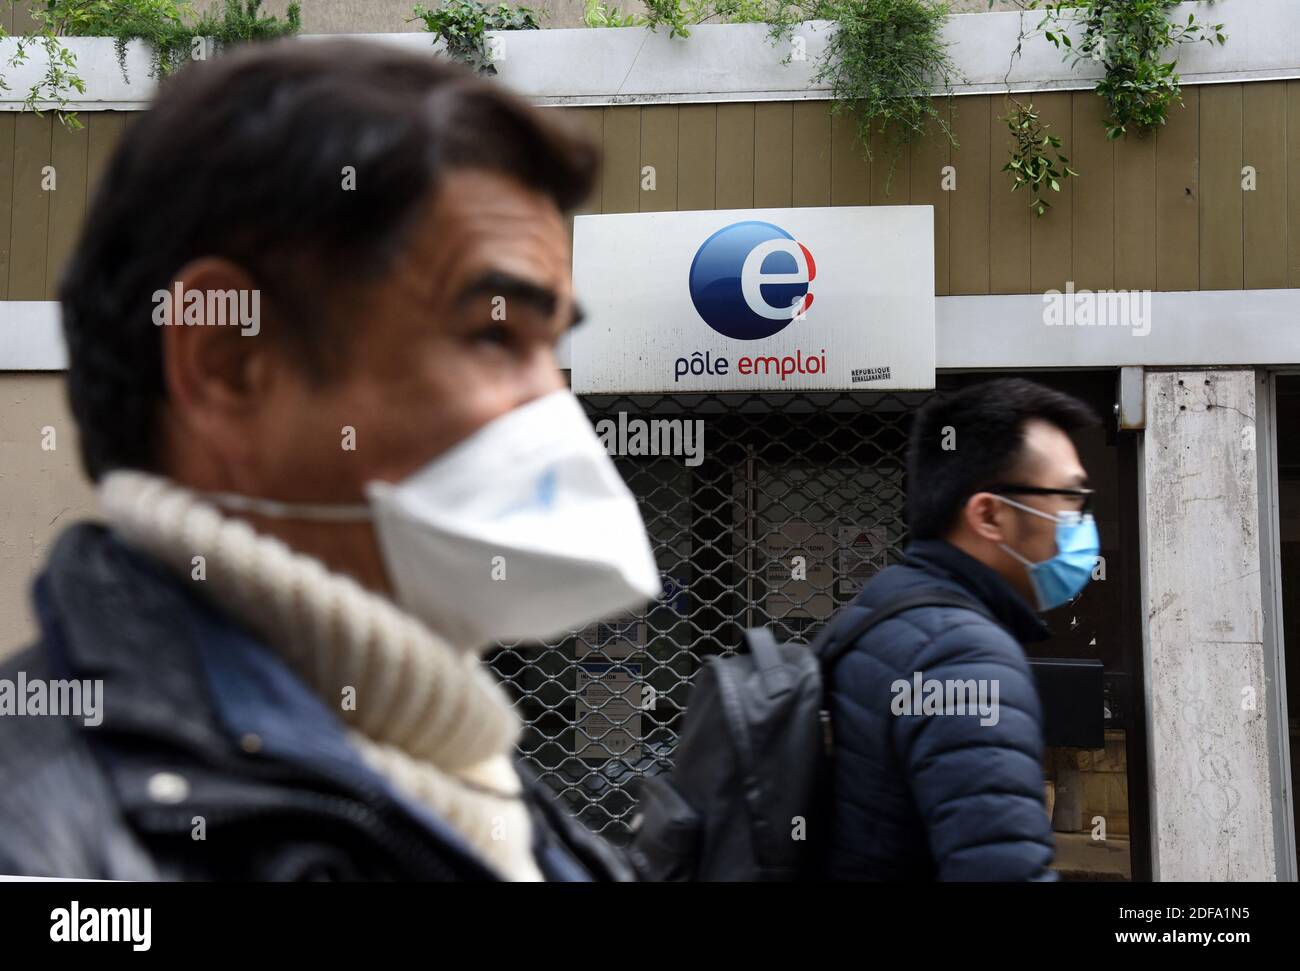 People wearing protective masks pass by a Pole Emploi (job center) on May 12, 2020 in Paris, France. Ten million workers in France are currently on a temporary unemployment scheme designed to avoid mass redundancies as companies struggle to stay afloat during the coronavirus pandemic. As Covid-19 hit France, the government quickly introduced a system whereby companies can temporarily put staff on reduced or no hours while the state picks up all or most of their net wages for unworked time.Photo by Alain Apaydin/ABACAPRESS.COM Stock Photo